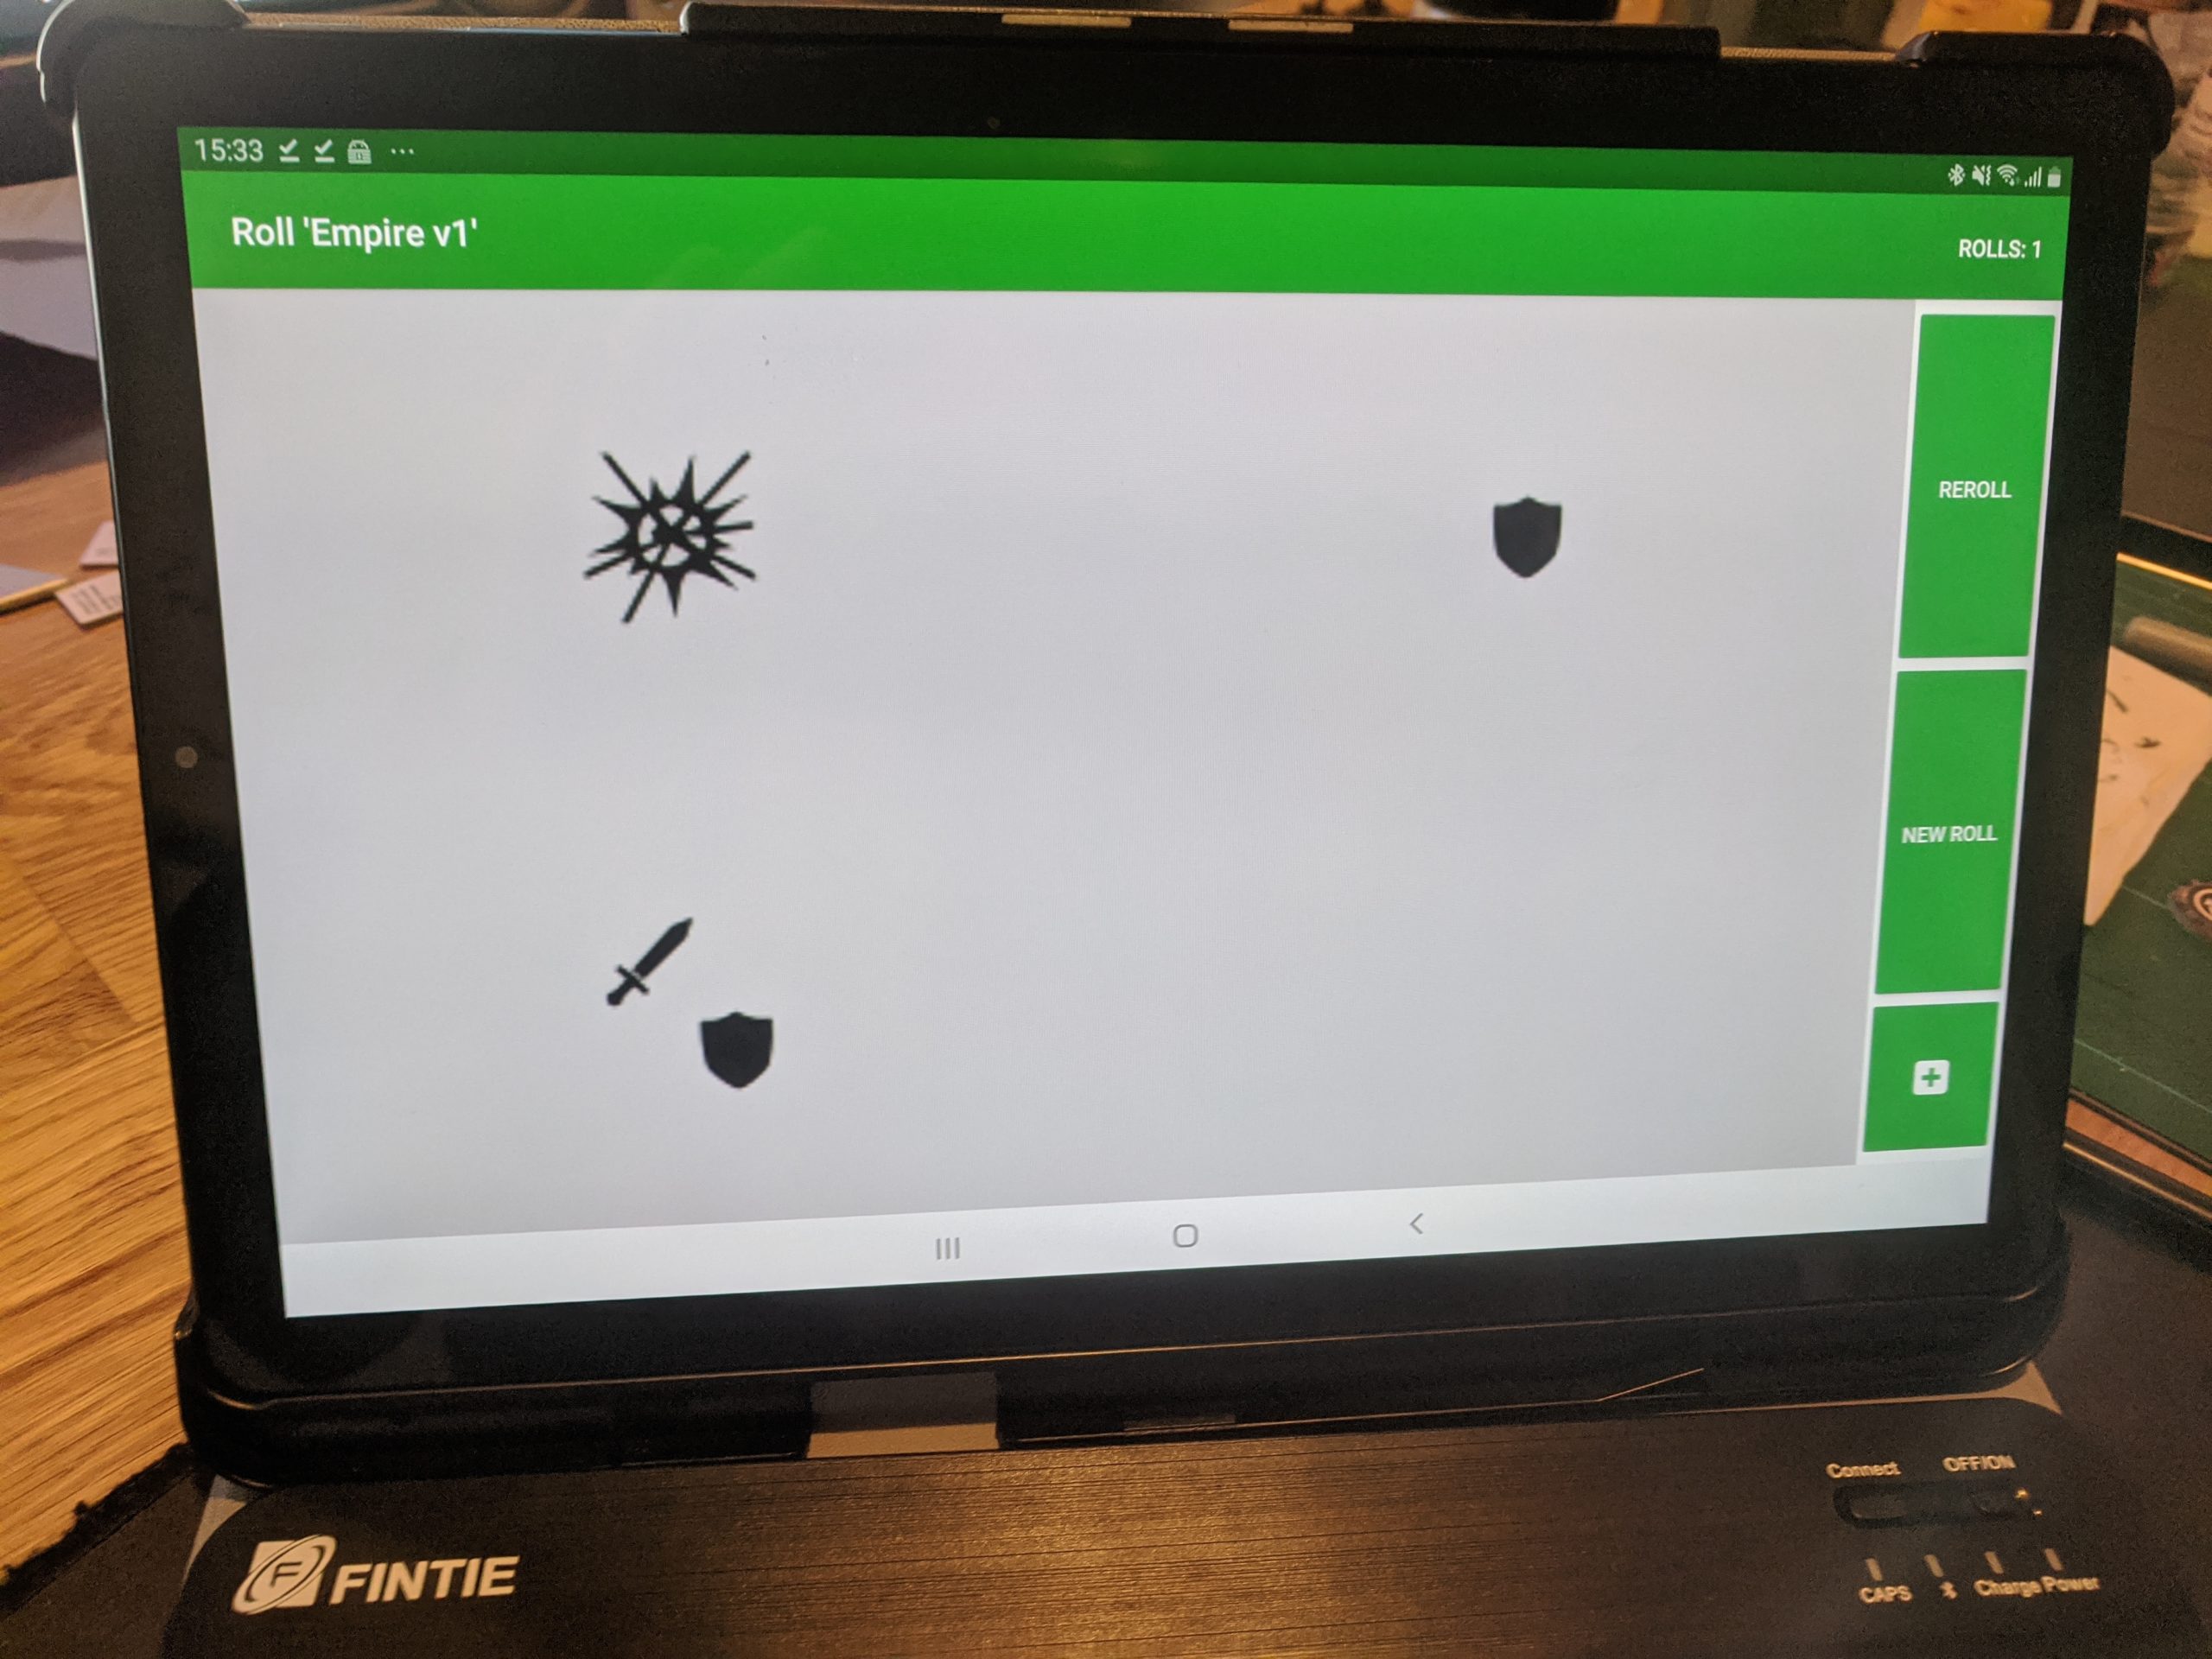 Photo of the 'custom image dice' app running on a tablet